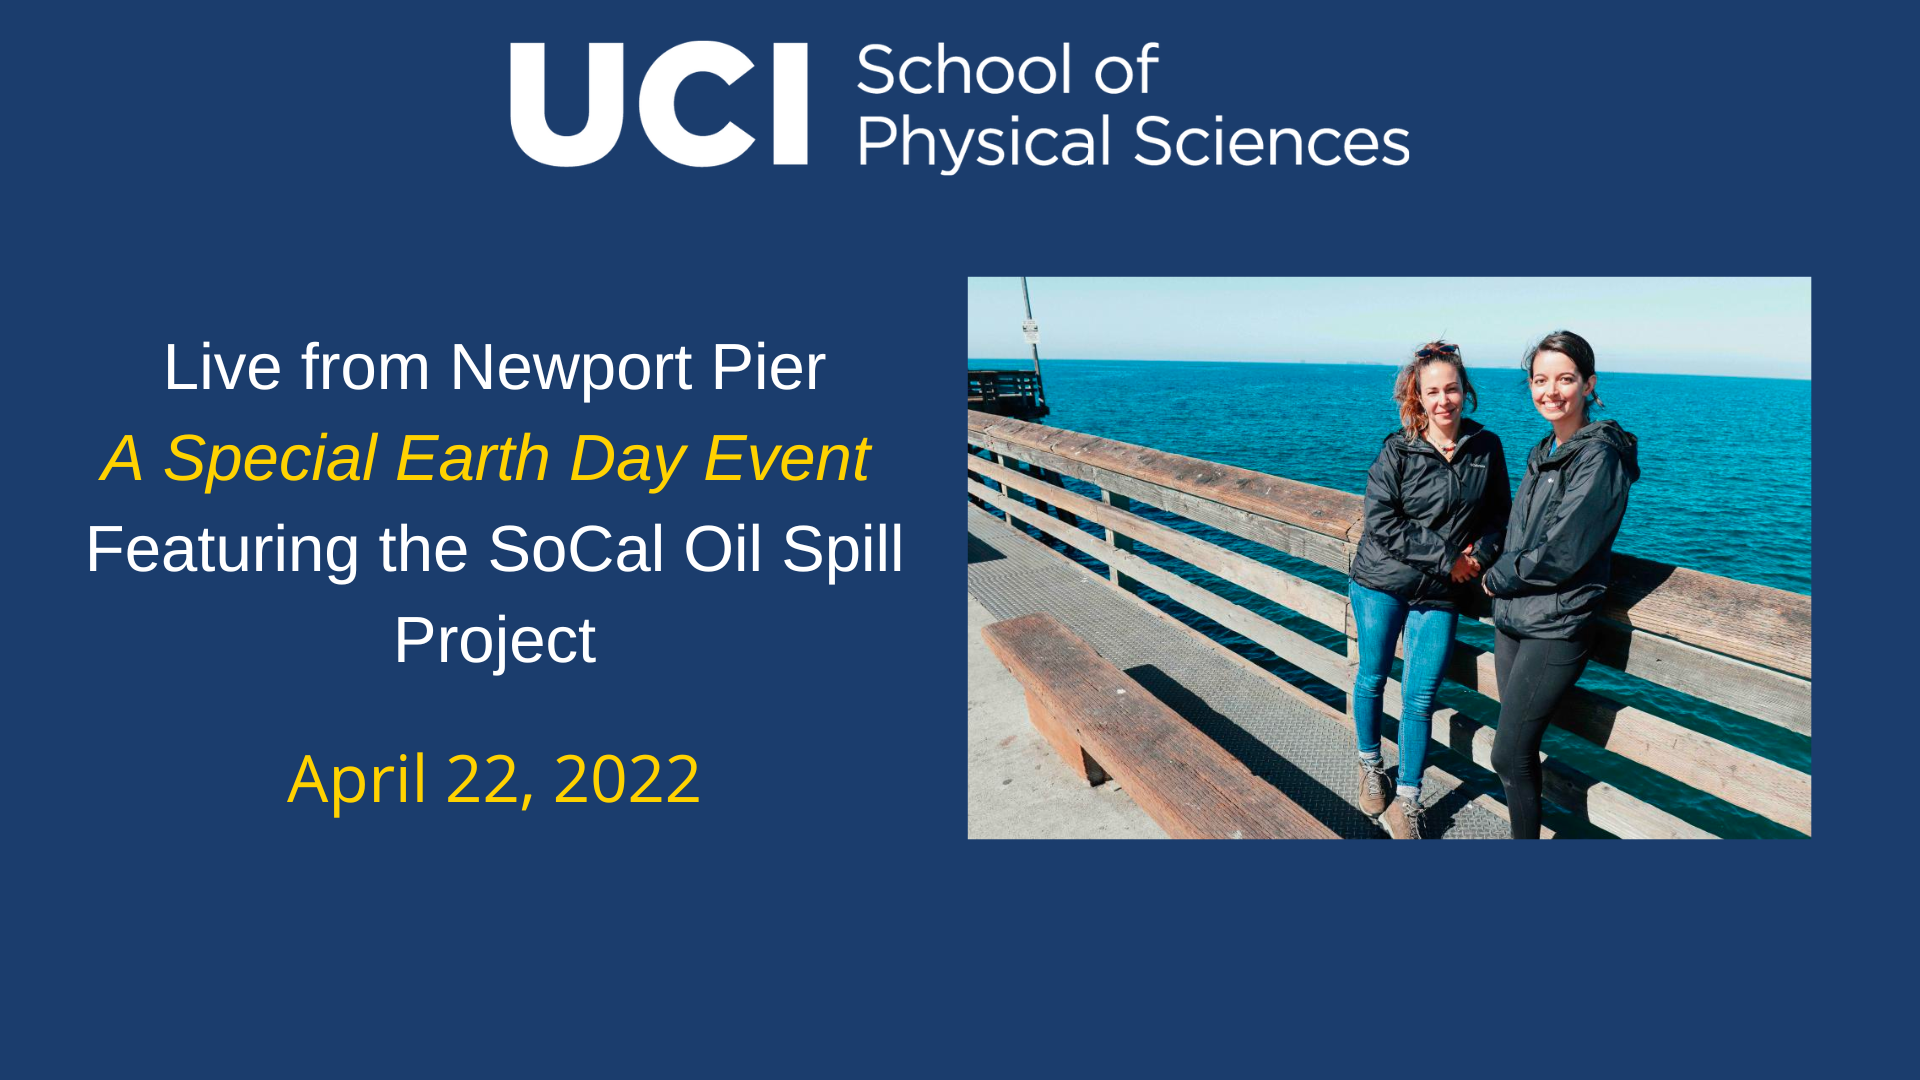 Dark blue background with text "Live from Newport Pier: A Special Earth Day Event Featuring the SoCal Oil Spill Project" with a photo on the right of UC Irvine Ph.D. students, Joana Tavares & Melissa Brock standing along the Newport Pier railing.